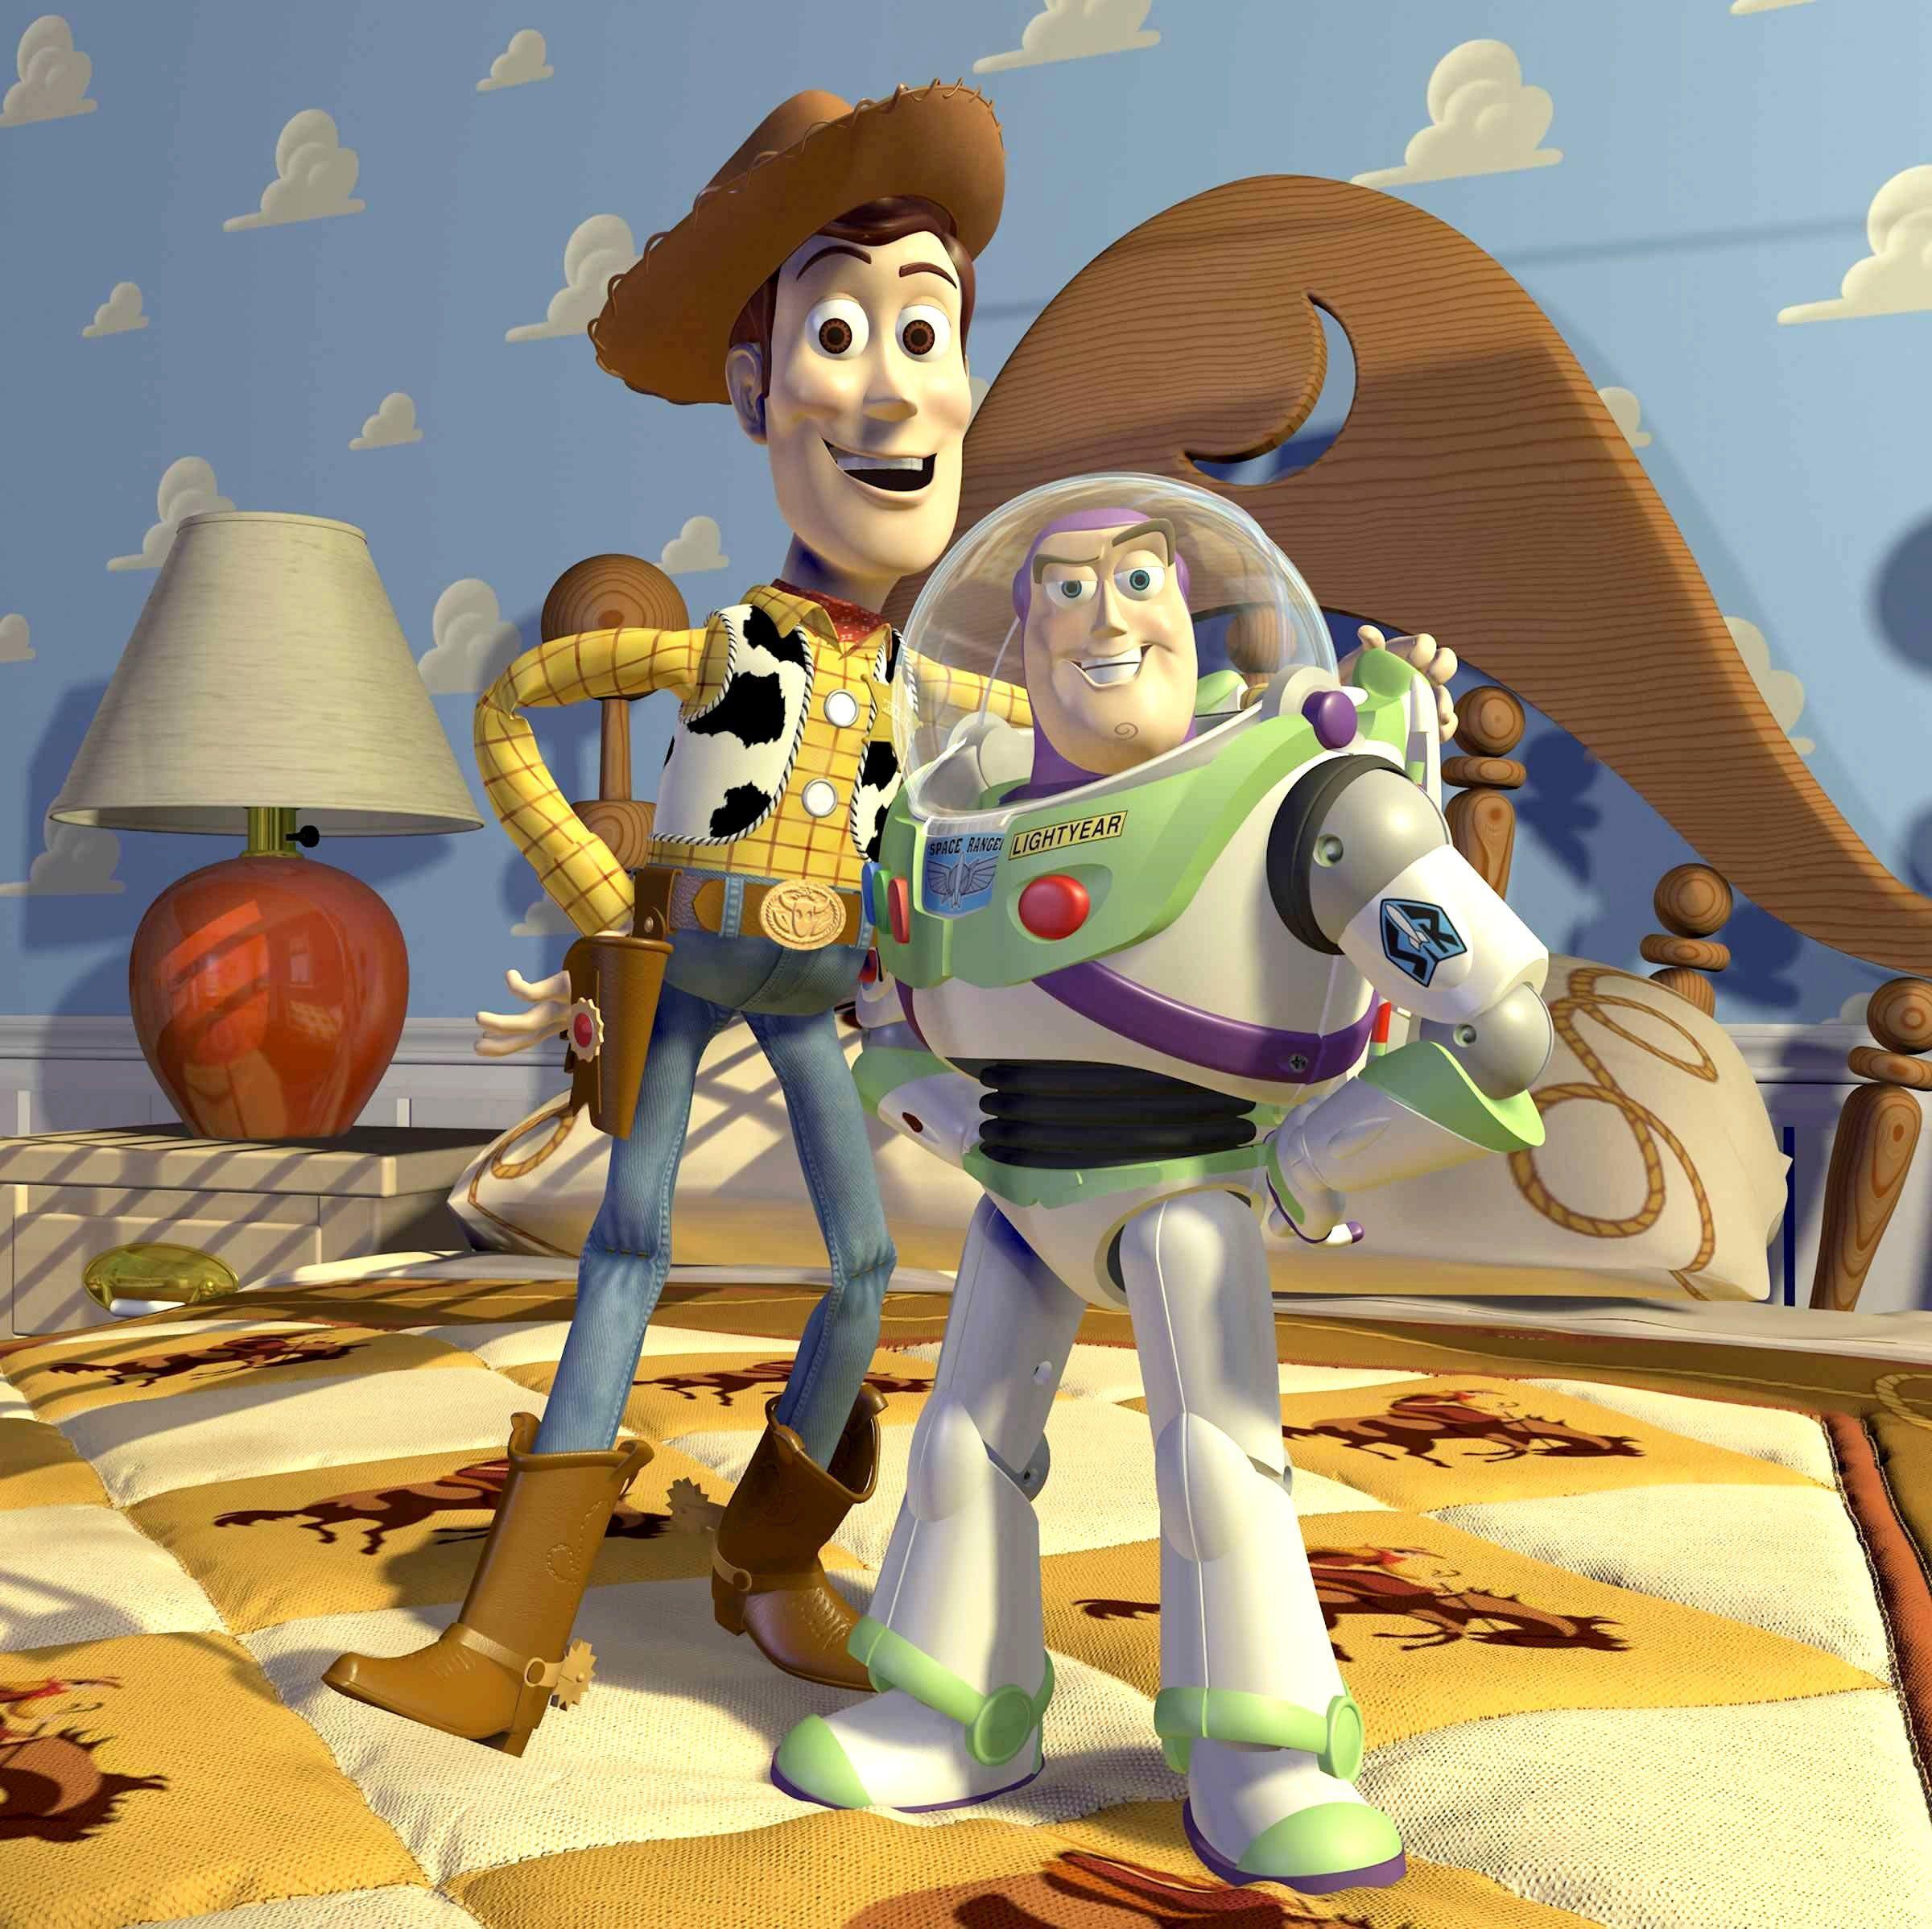 Toy Story 3 Woody and Buzz Wallpaper, Desktop, HD, Free Download